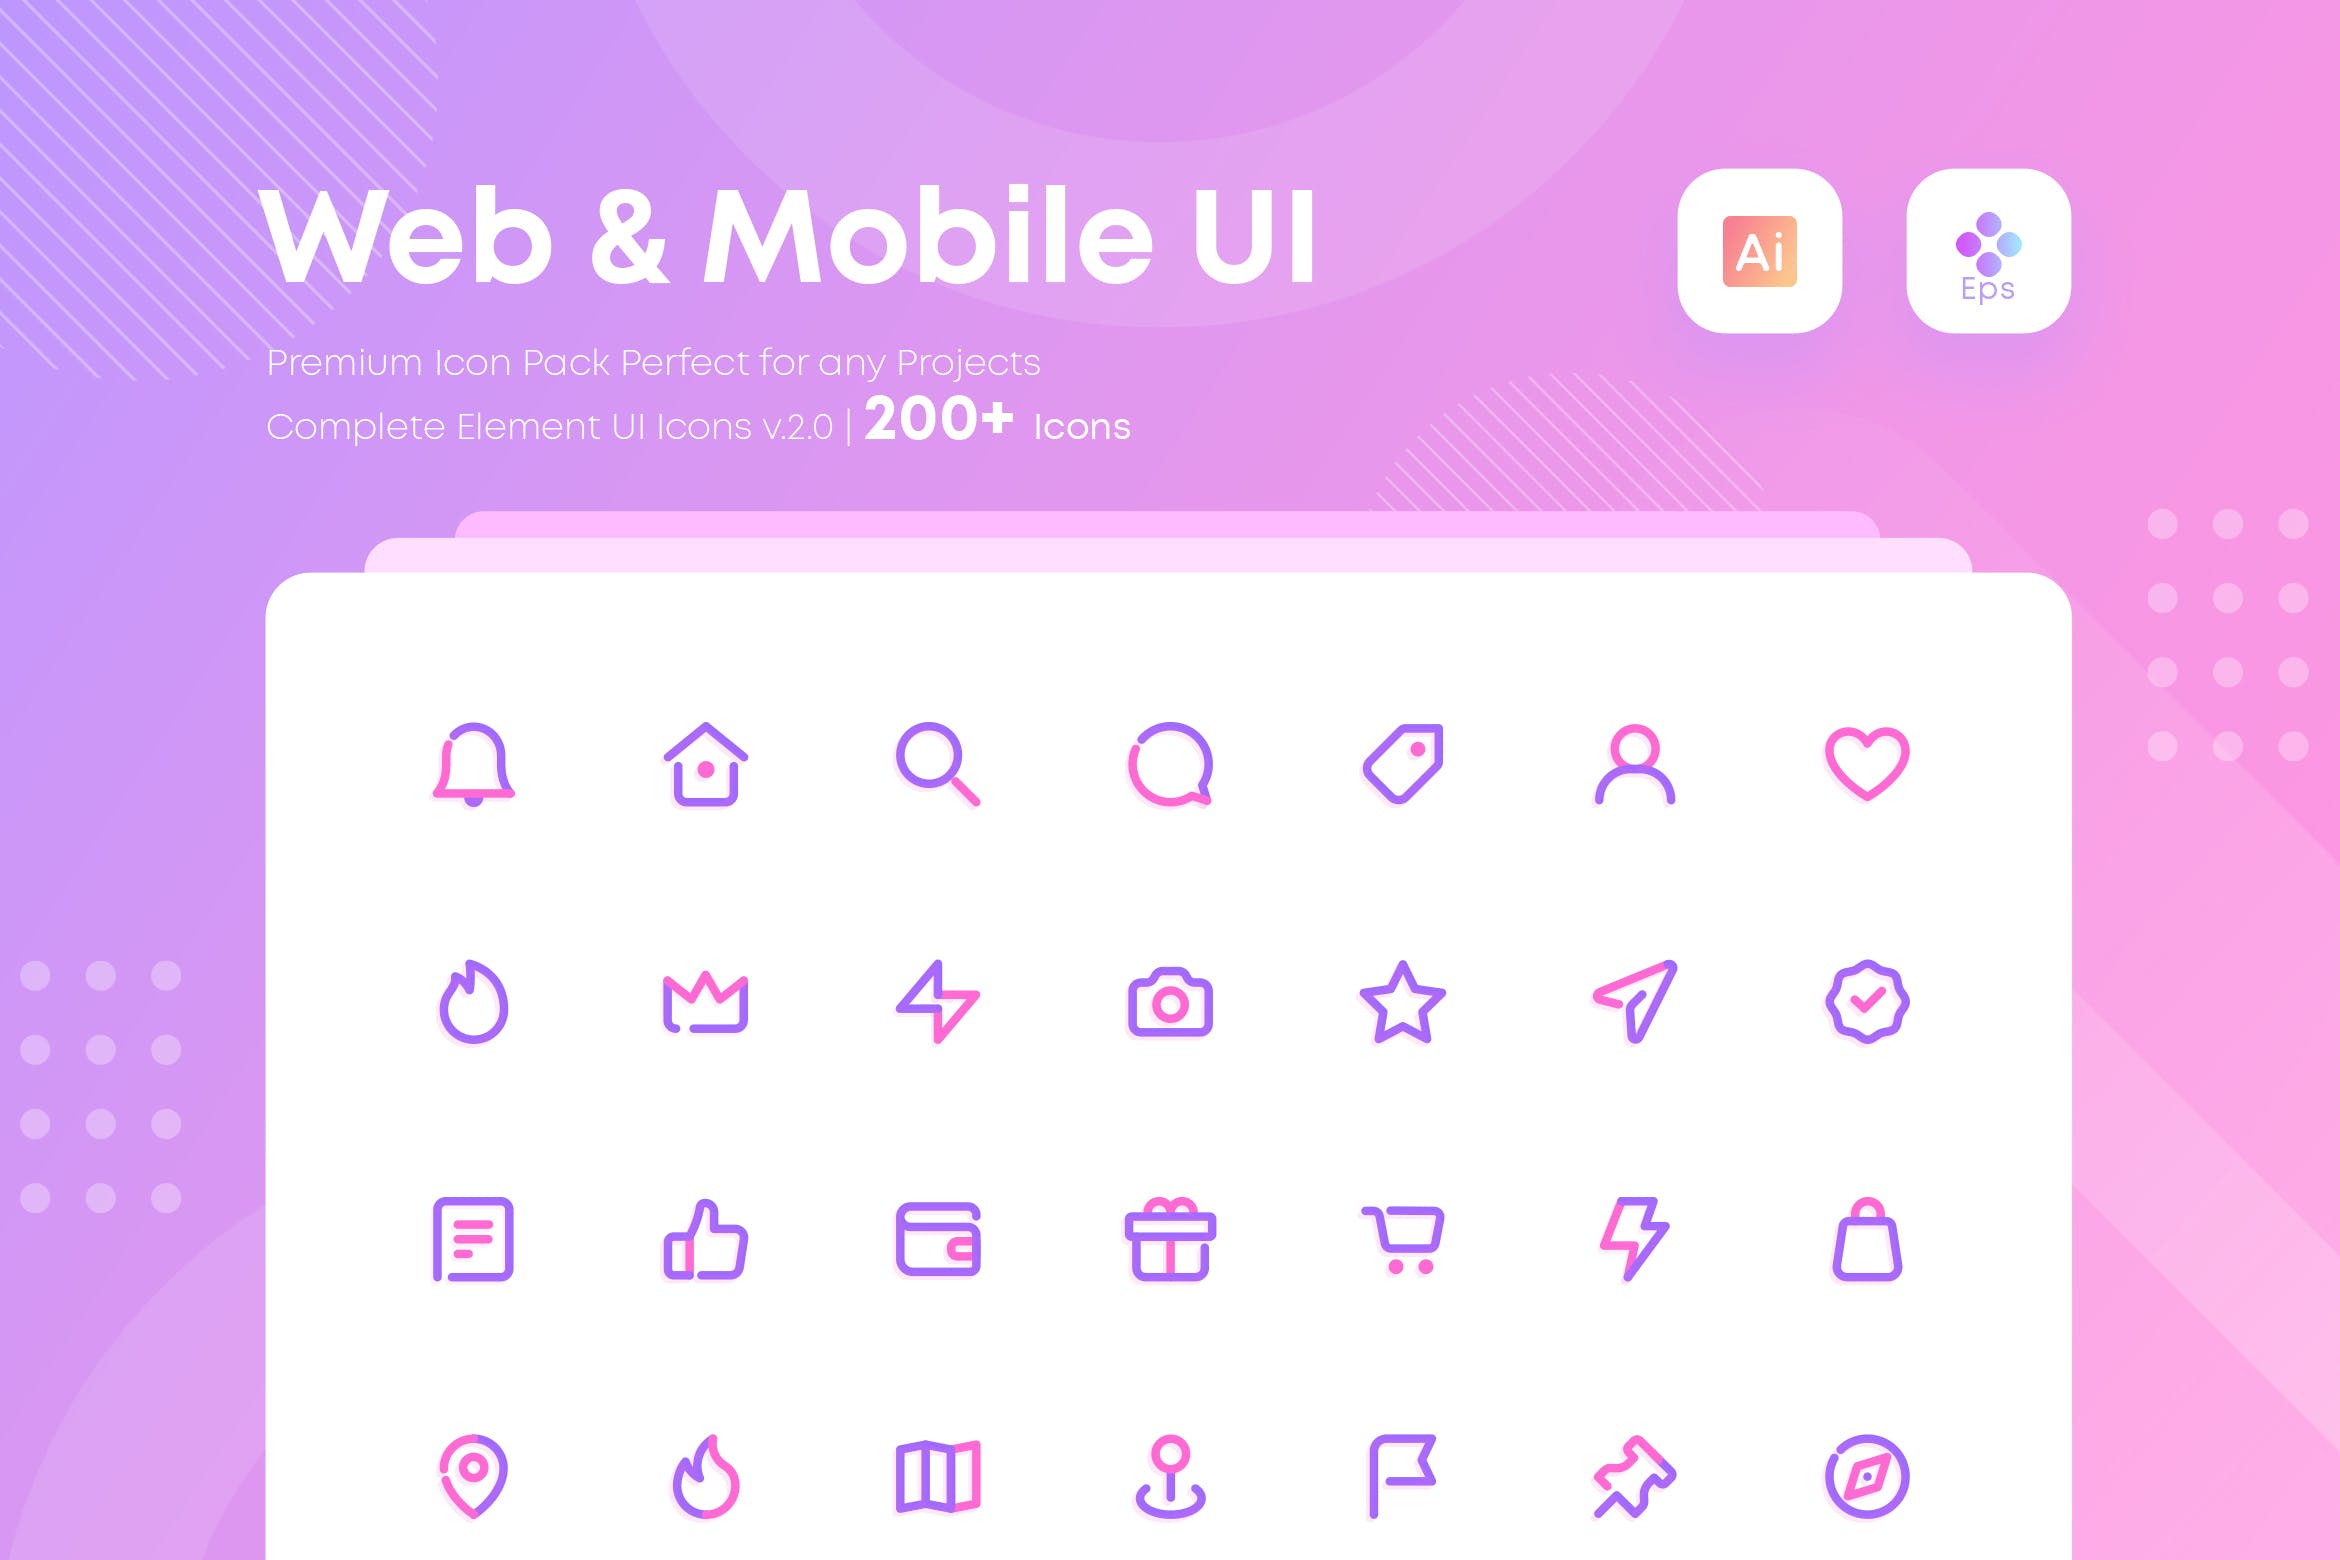 Web网站/APP应用UI设计图标素材包 Complete Web and Mobile UI Icons Pack插图